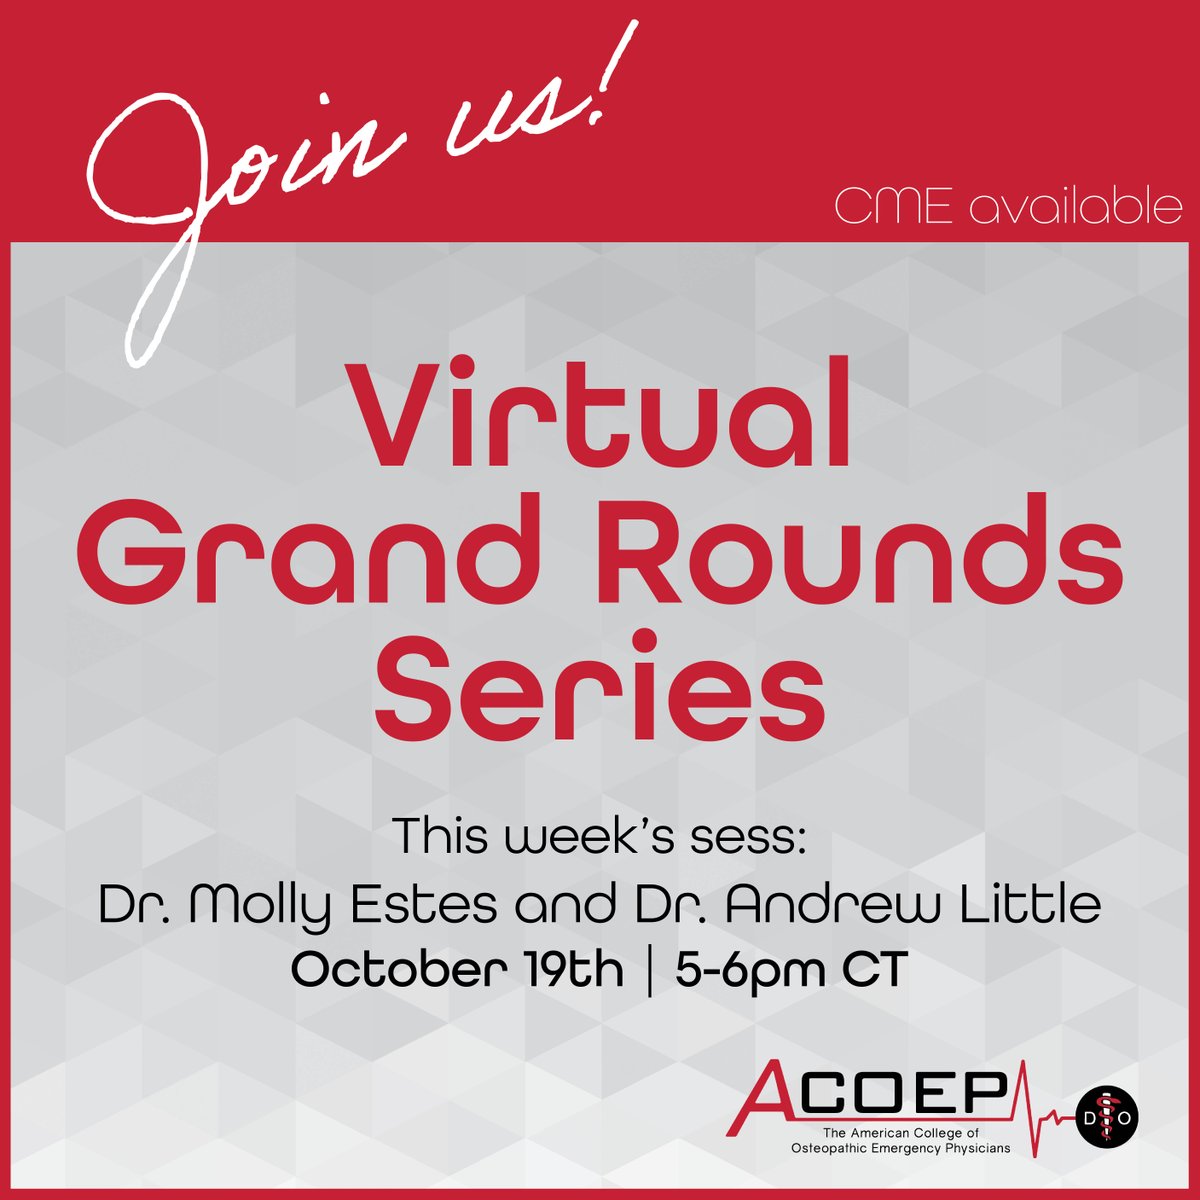 Earn CME credits! Sign up to see Dr. Estes and Dr. Little for our next Virtual Grand Rounds webinar on Oct 19th at 5pm CT. Register now for the full series or individual sessions! We'll see you there! ow.ly/xjlW50PSzBm